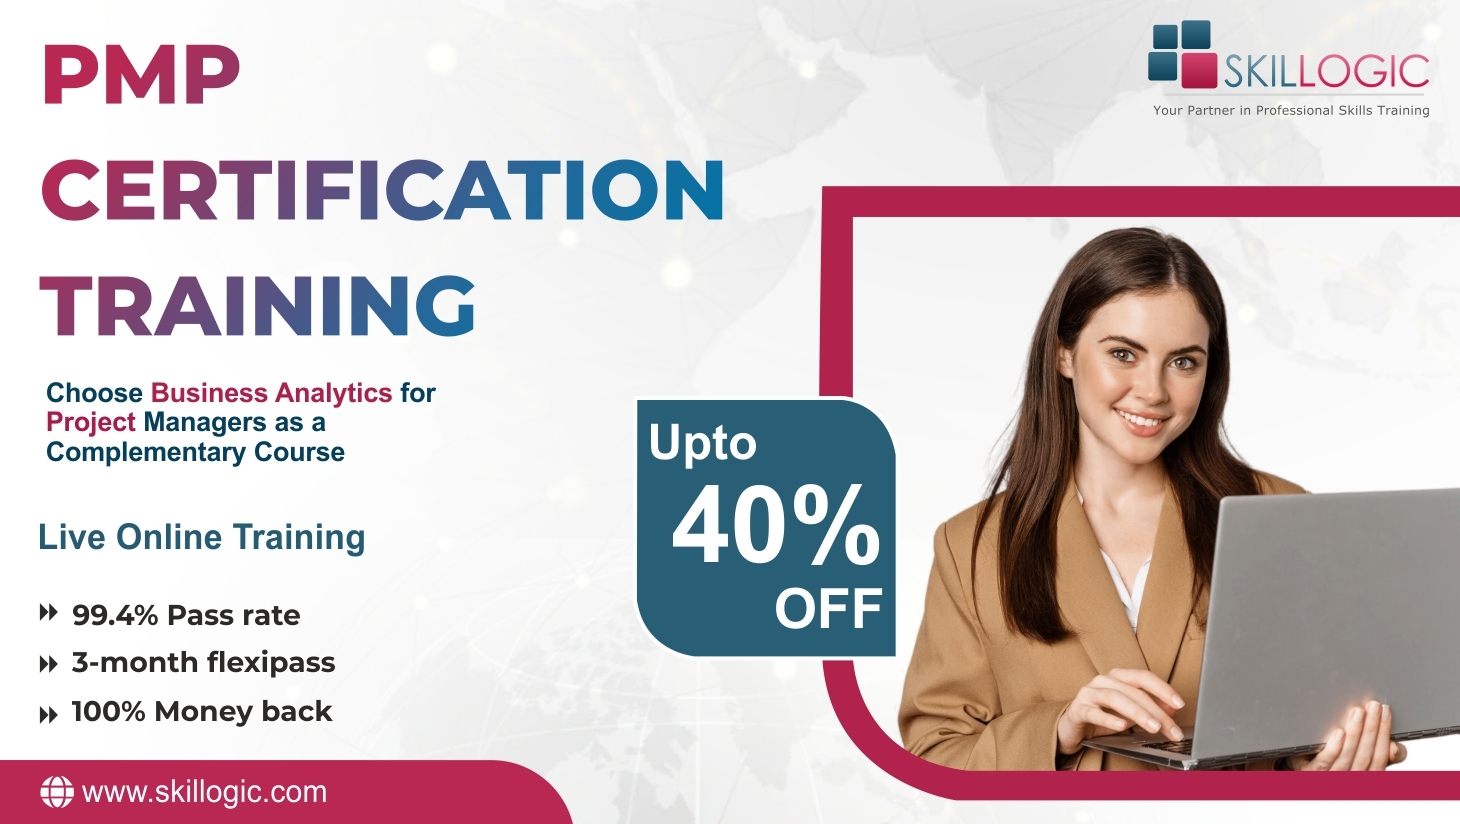 PMP Training Course in Bhopal, Online Event